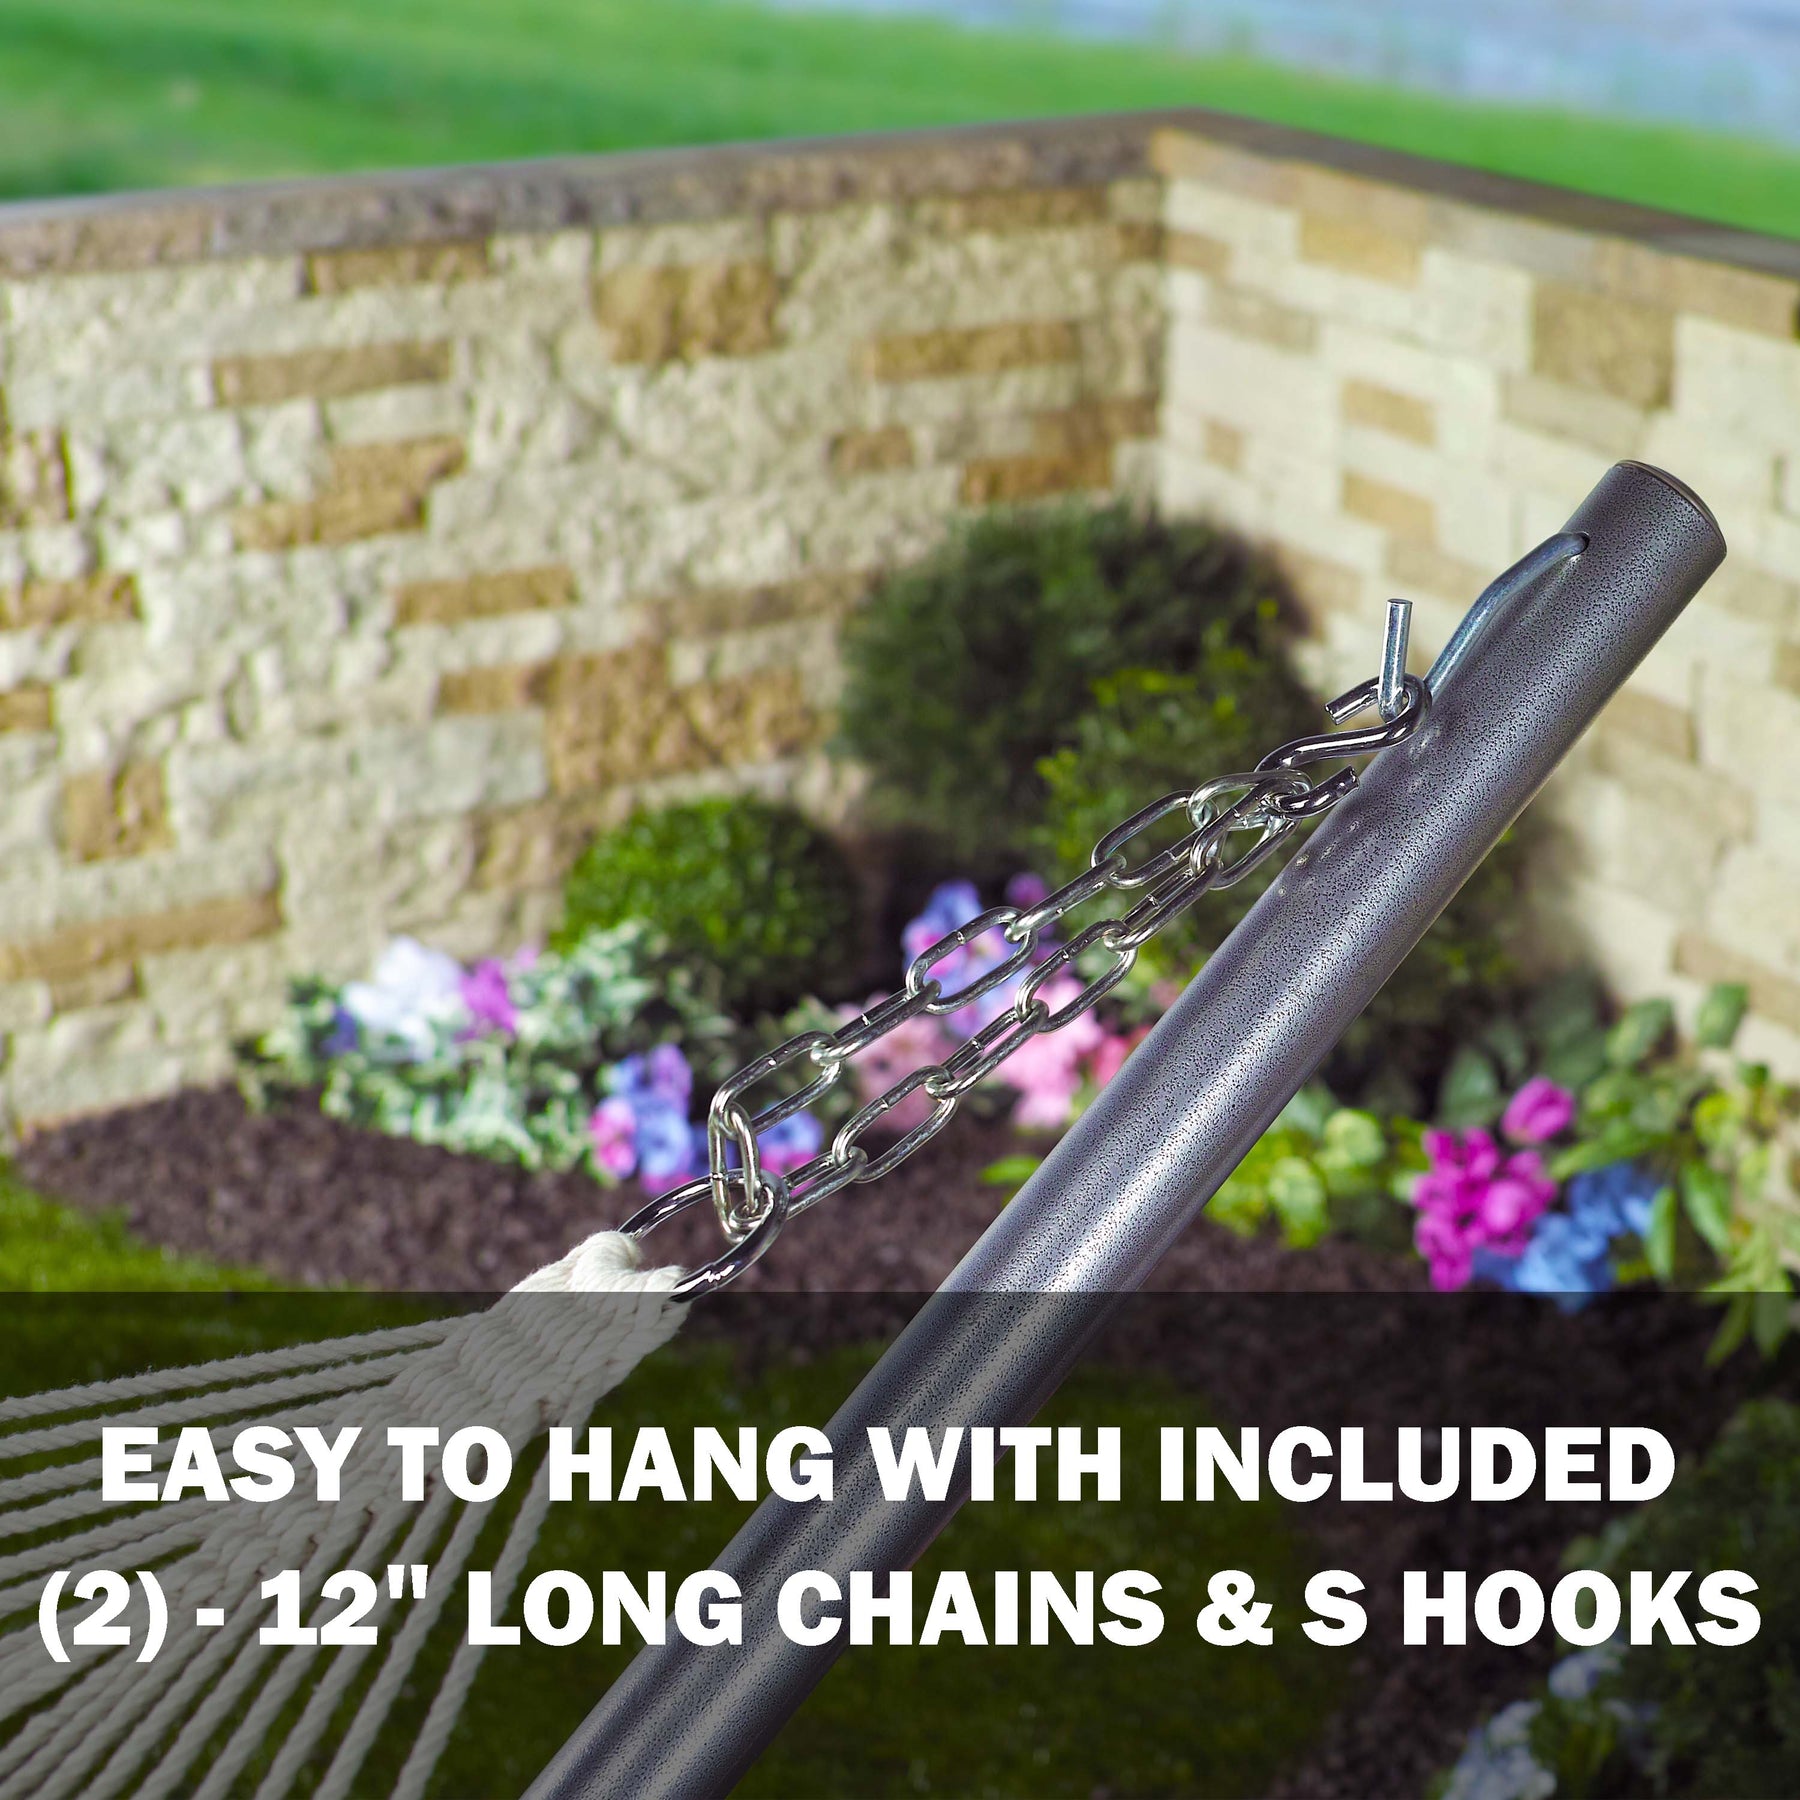 Easy to hang with included 2 12-inch long chains and S-hooks.